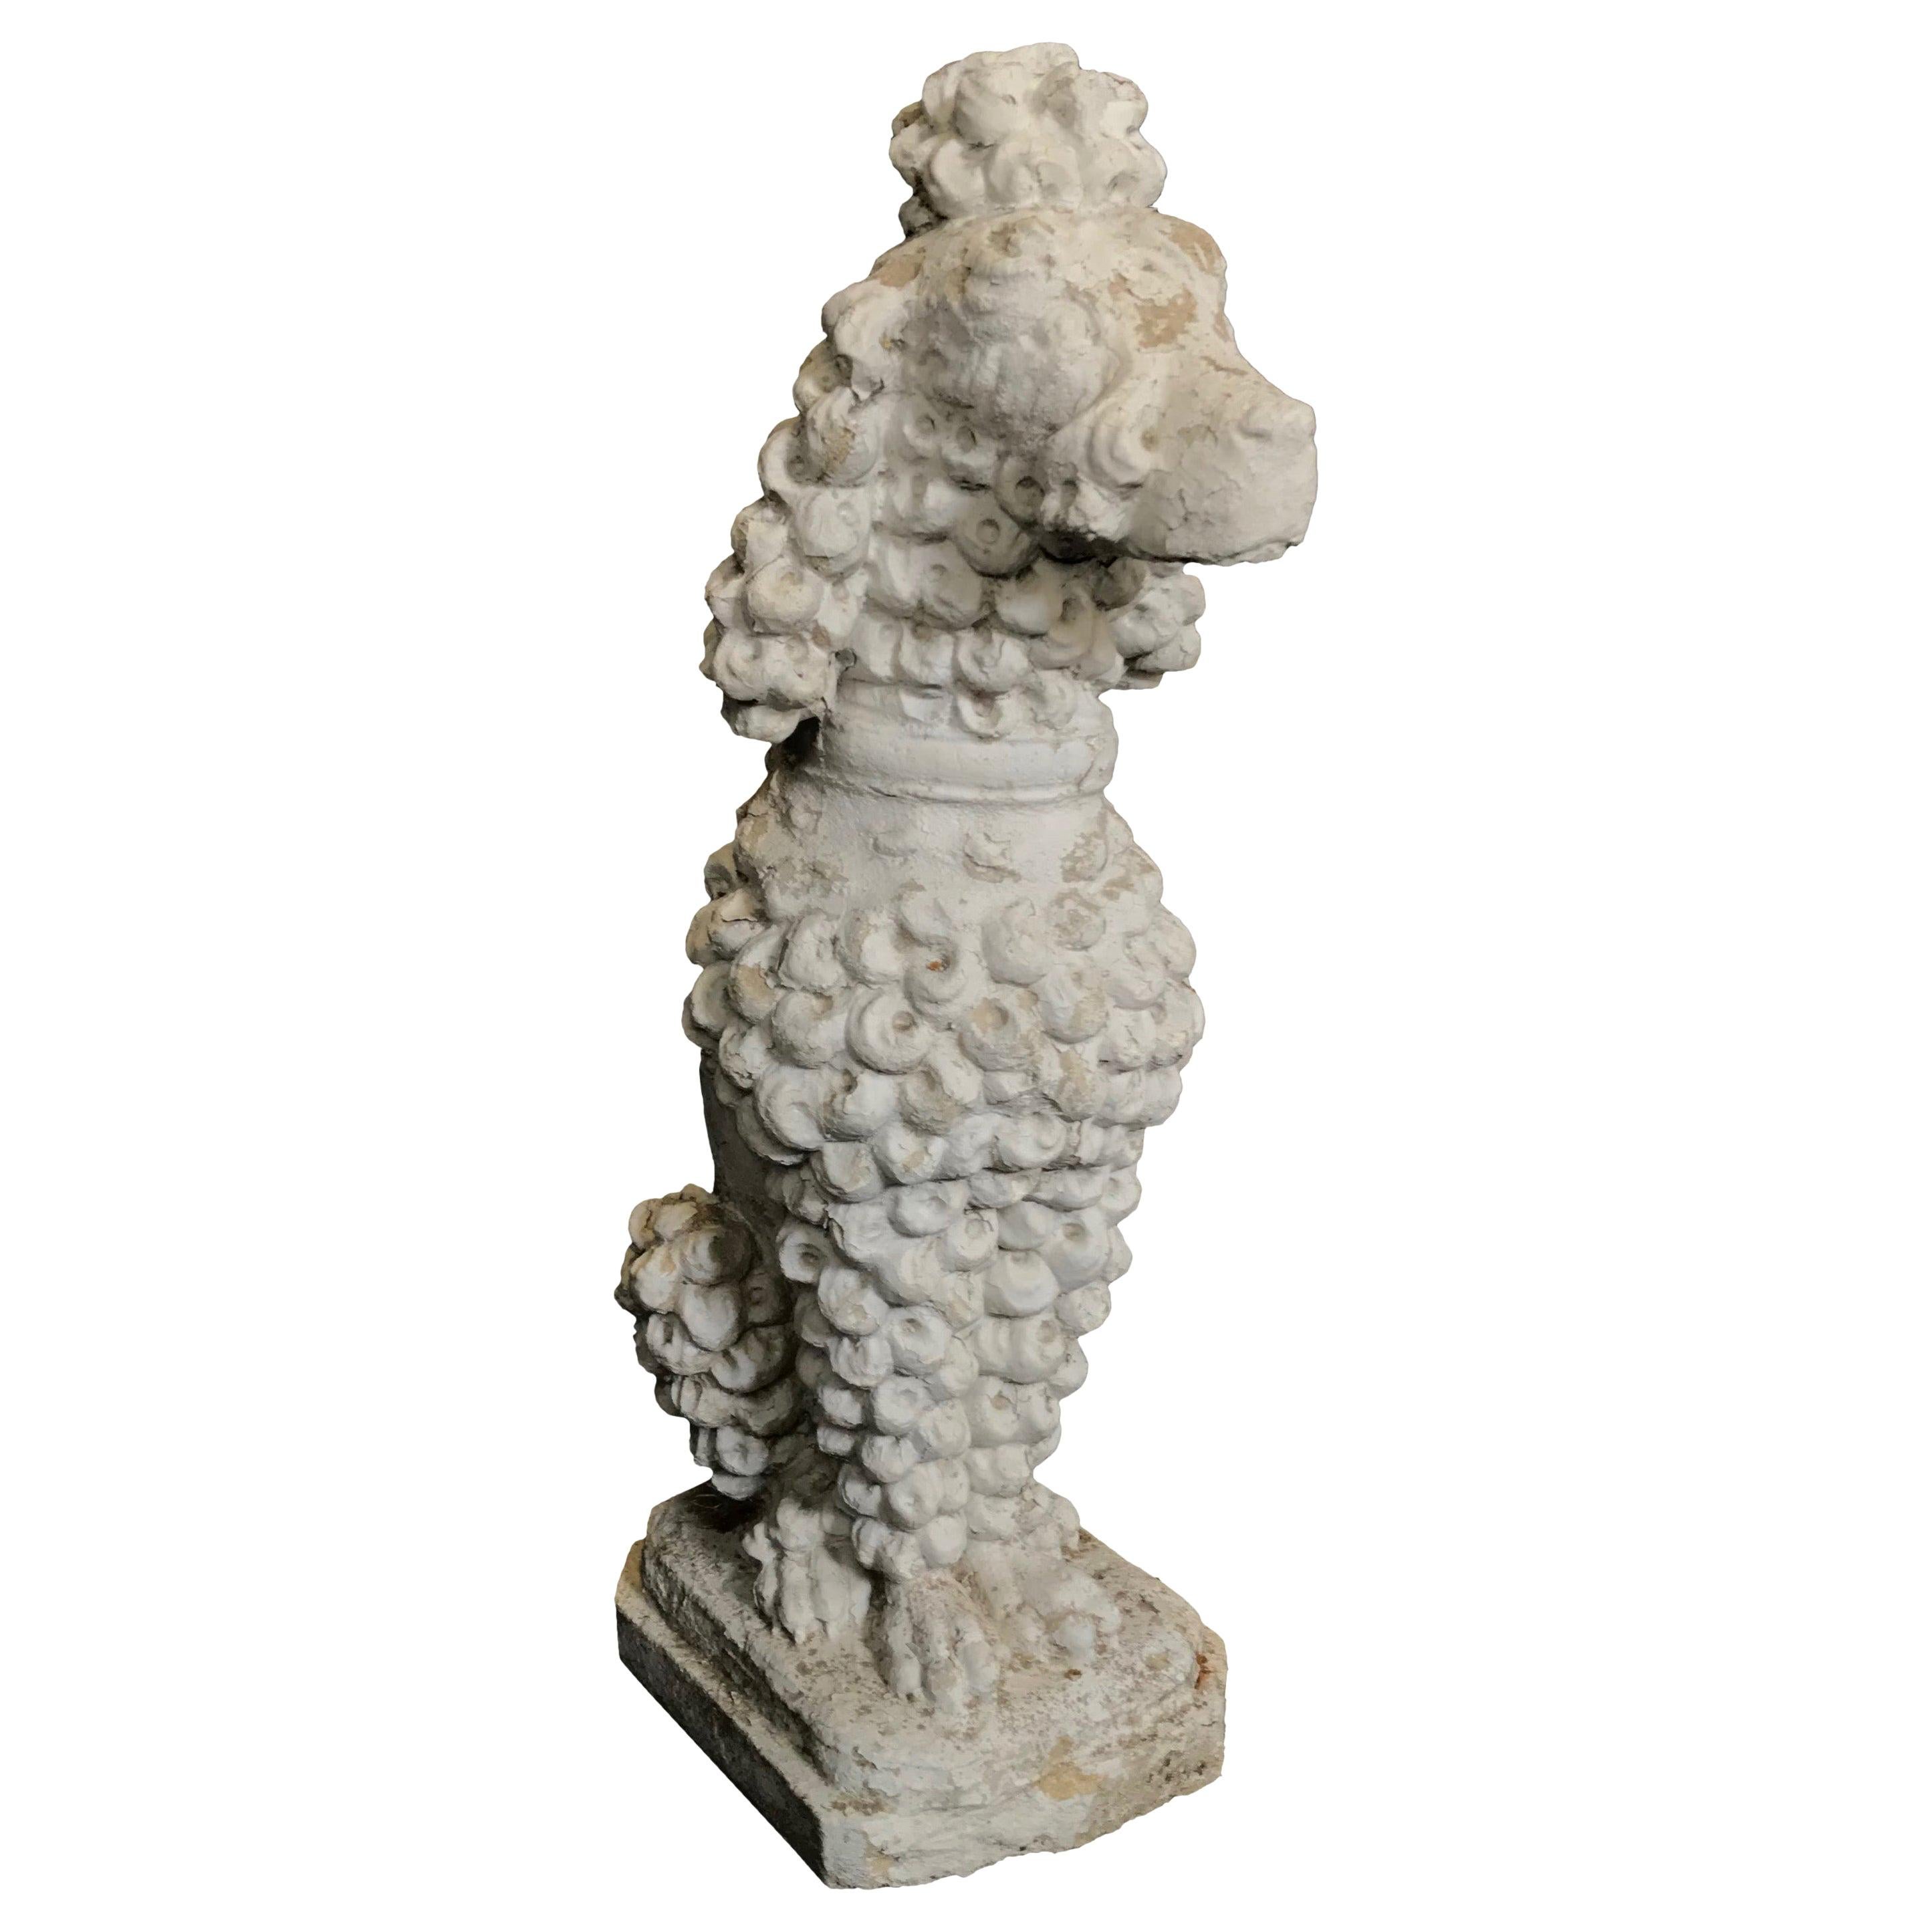 Dog Lovers' Life-Sized Stone French Poodle Sculpture Statue